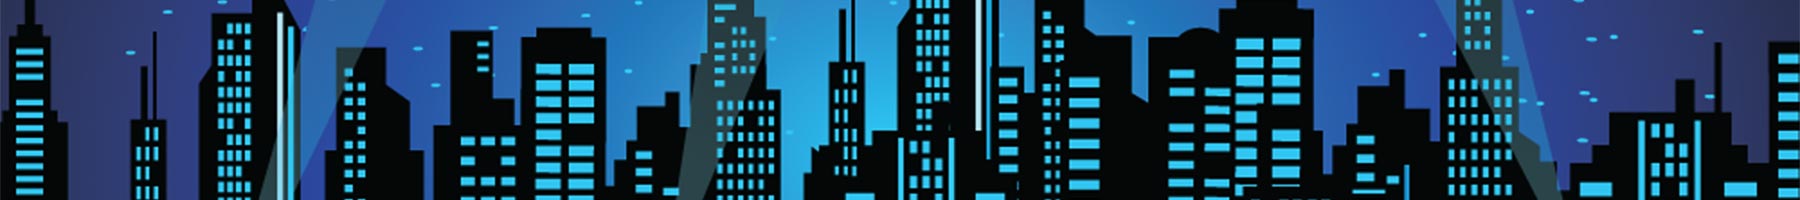 blue and black vector illustration of a city skyline